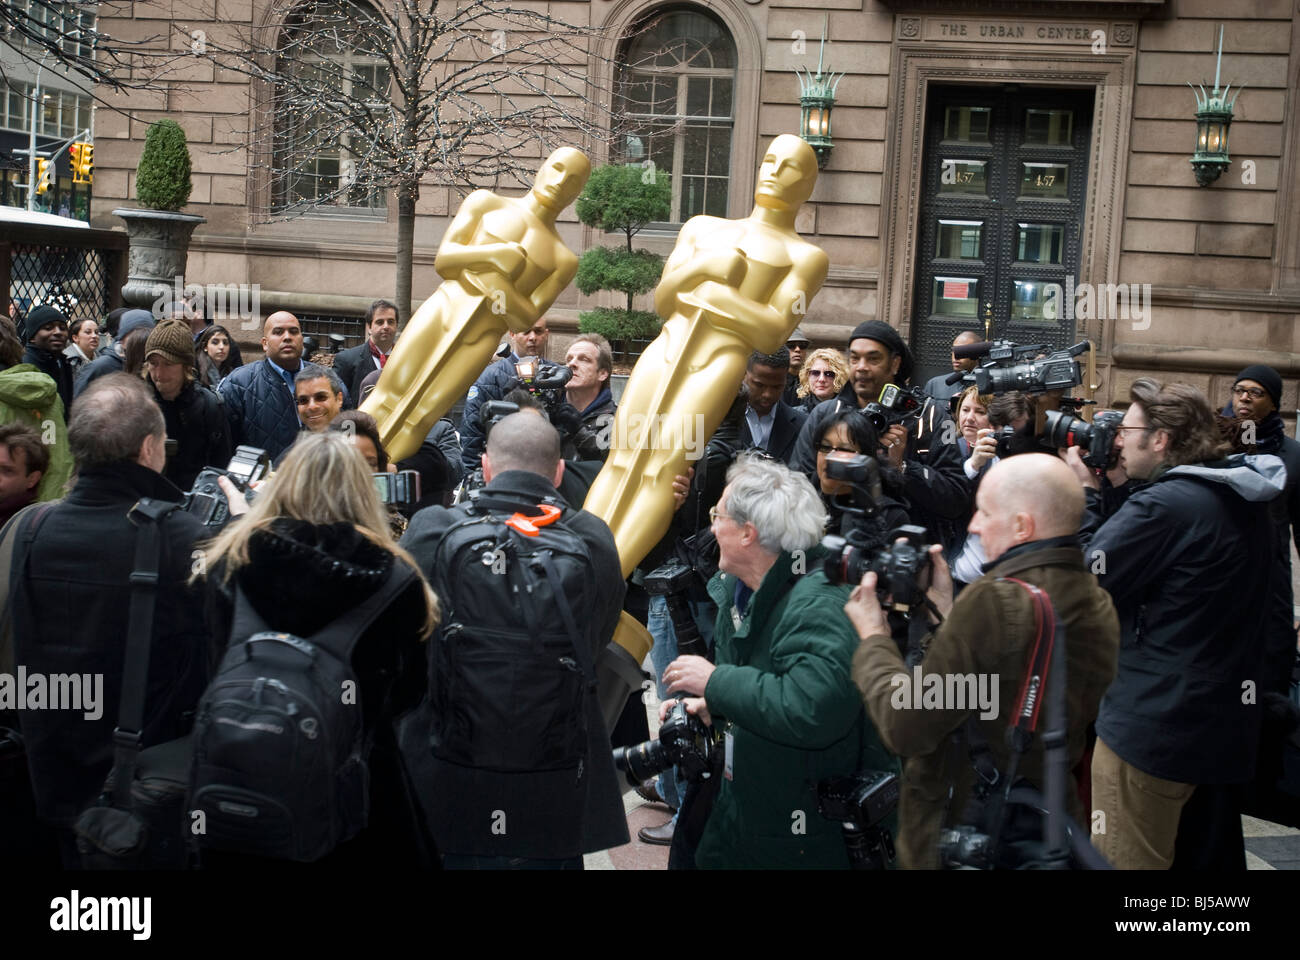 Oscar statues are delivered to the New York Palace Hotel prior to the New York party for Academy Awards Stock Photo